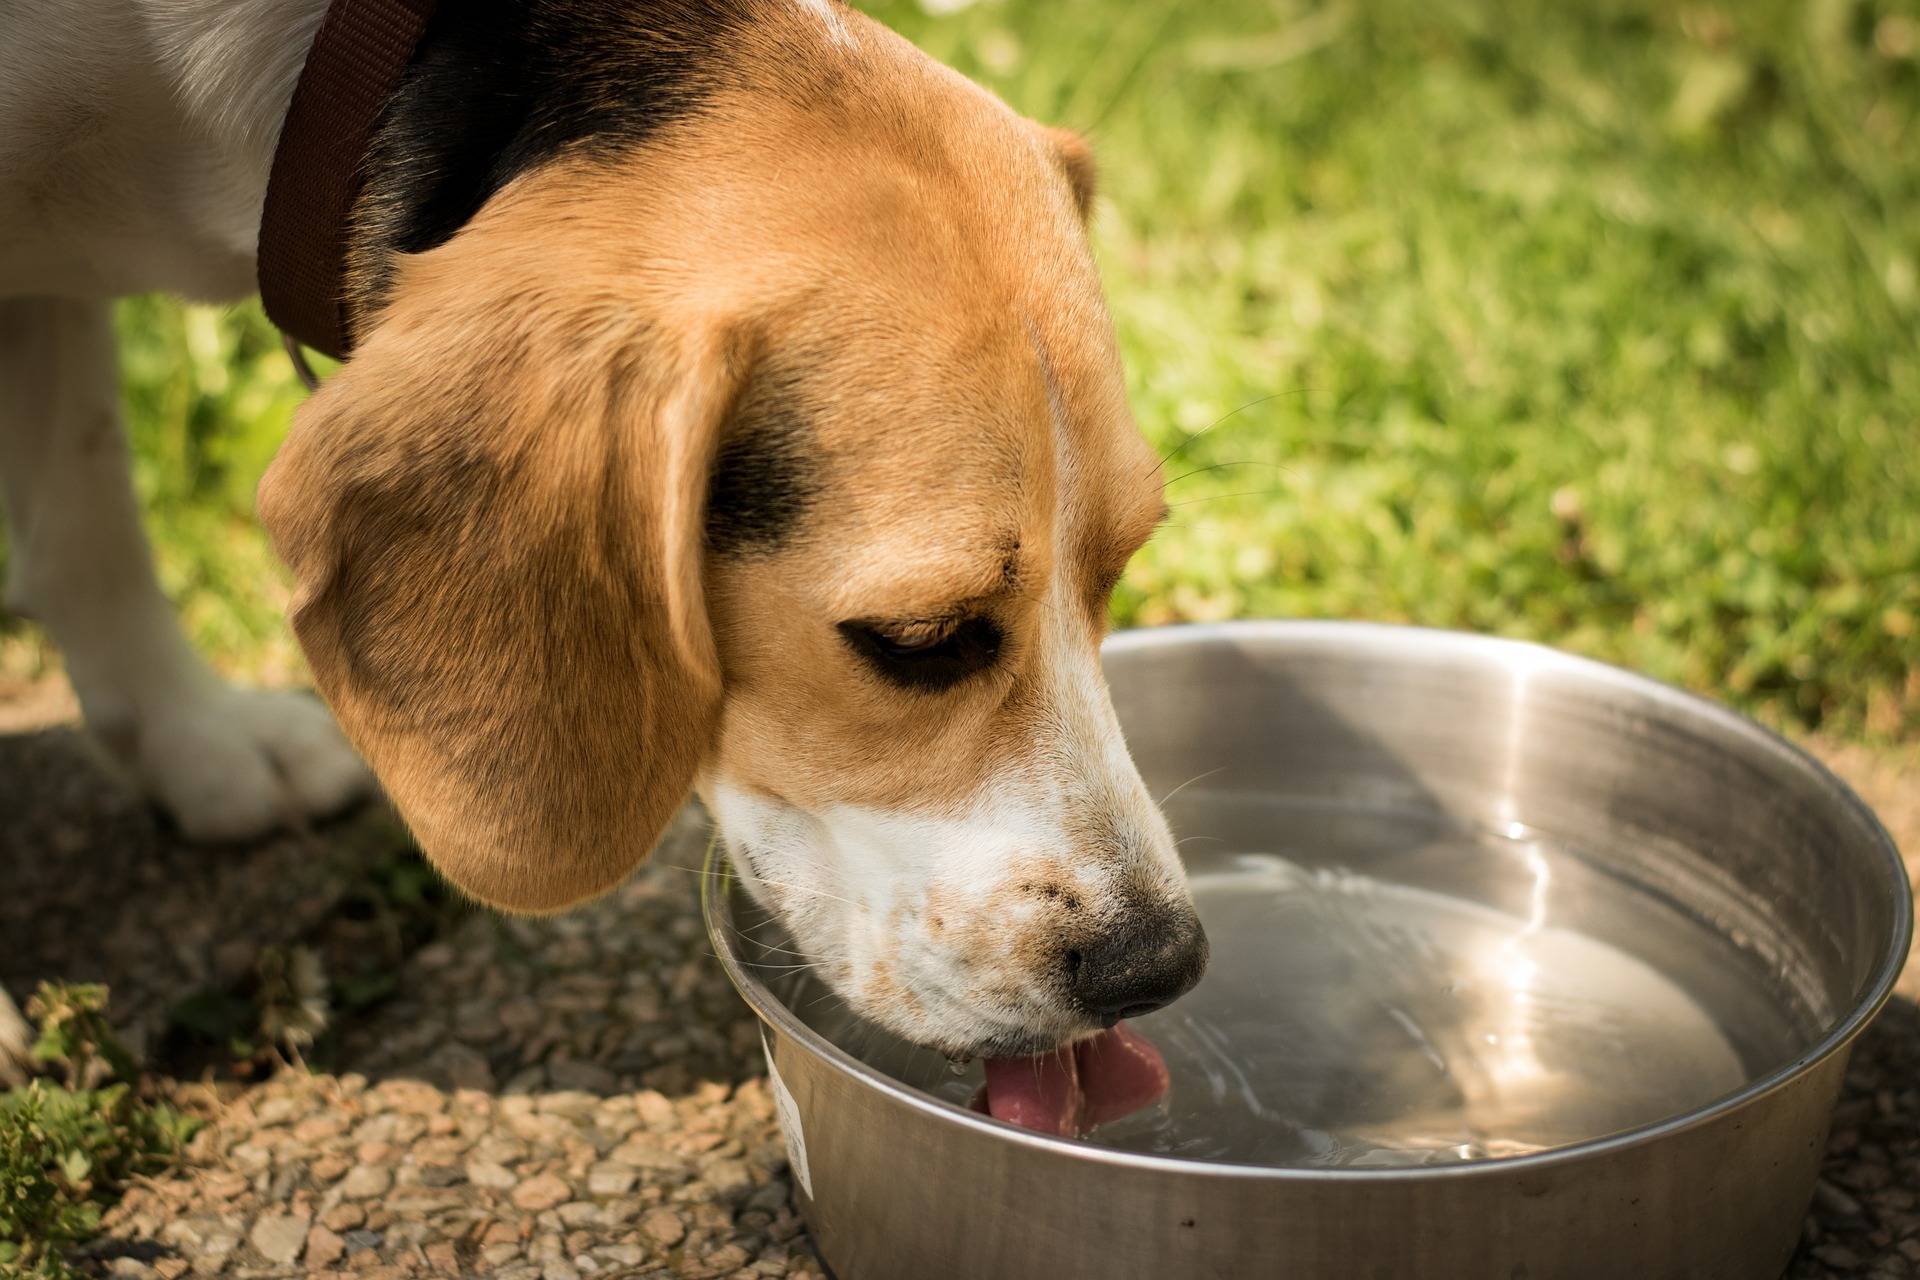 https://www.clearwatersystems.com/wp-content/uploads/2019/03/dog-drinking-water.jpg